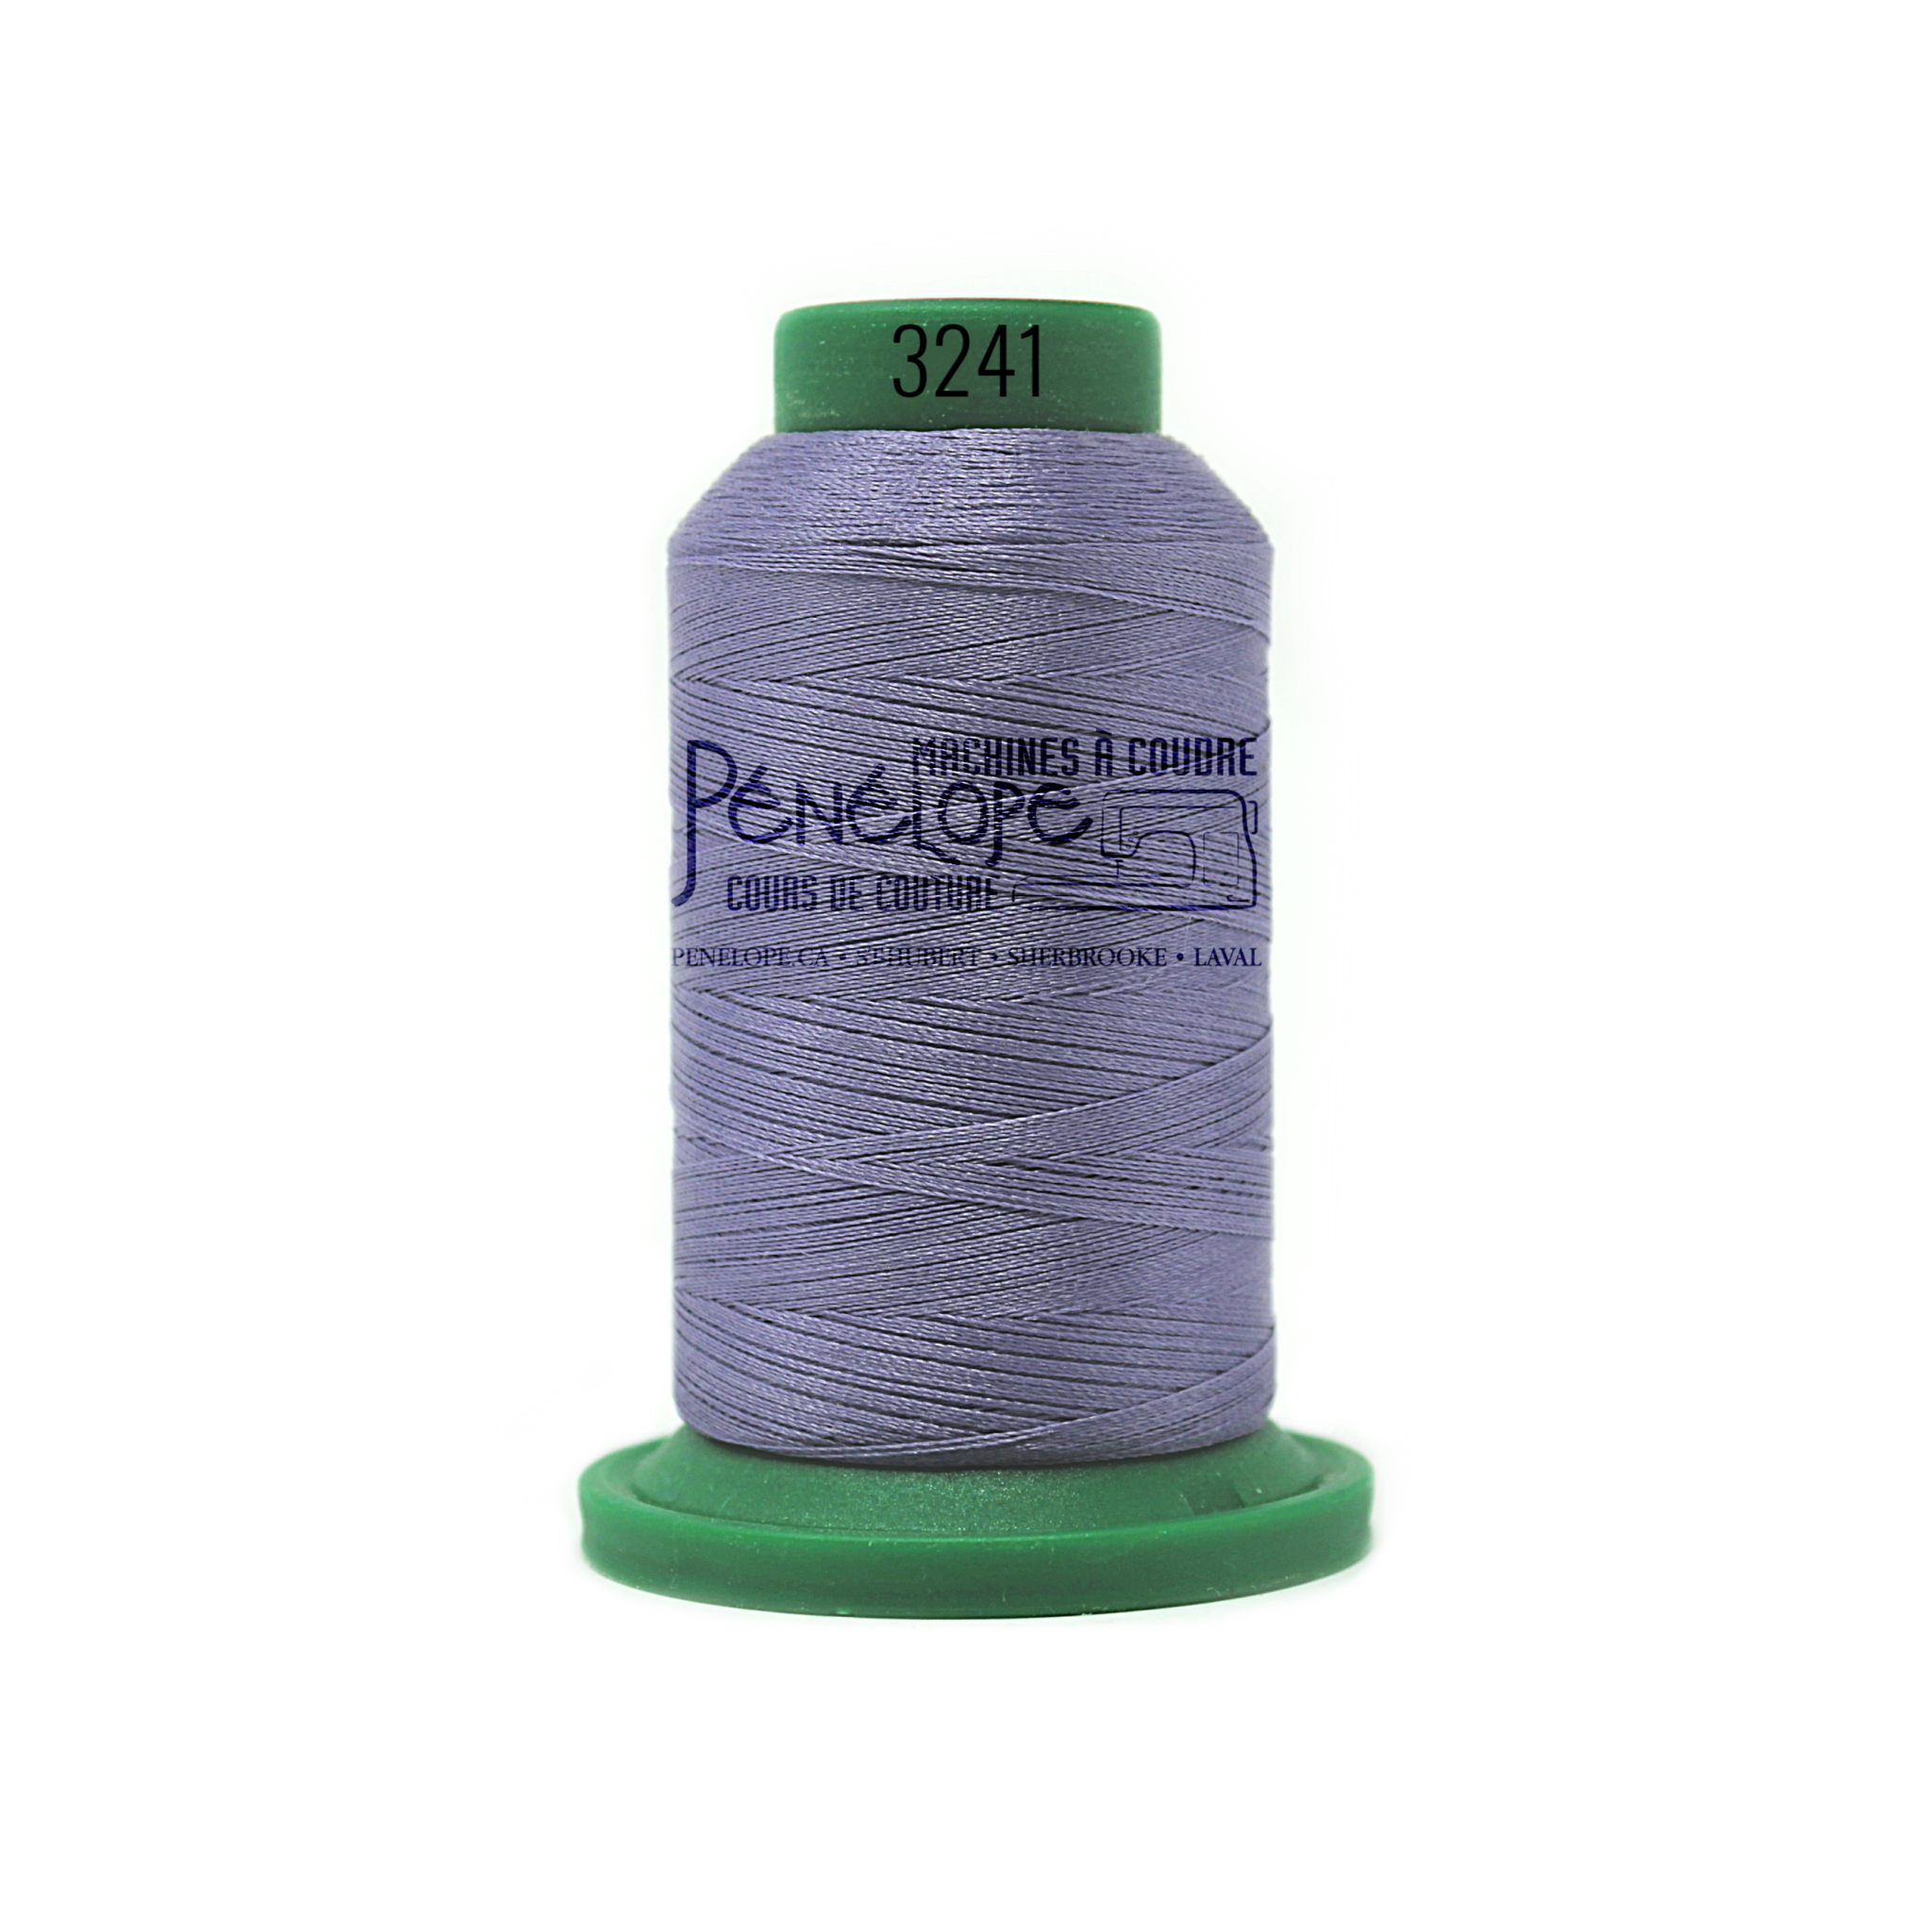 Isacord Fil Isacord couture et broderie 3241